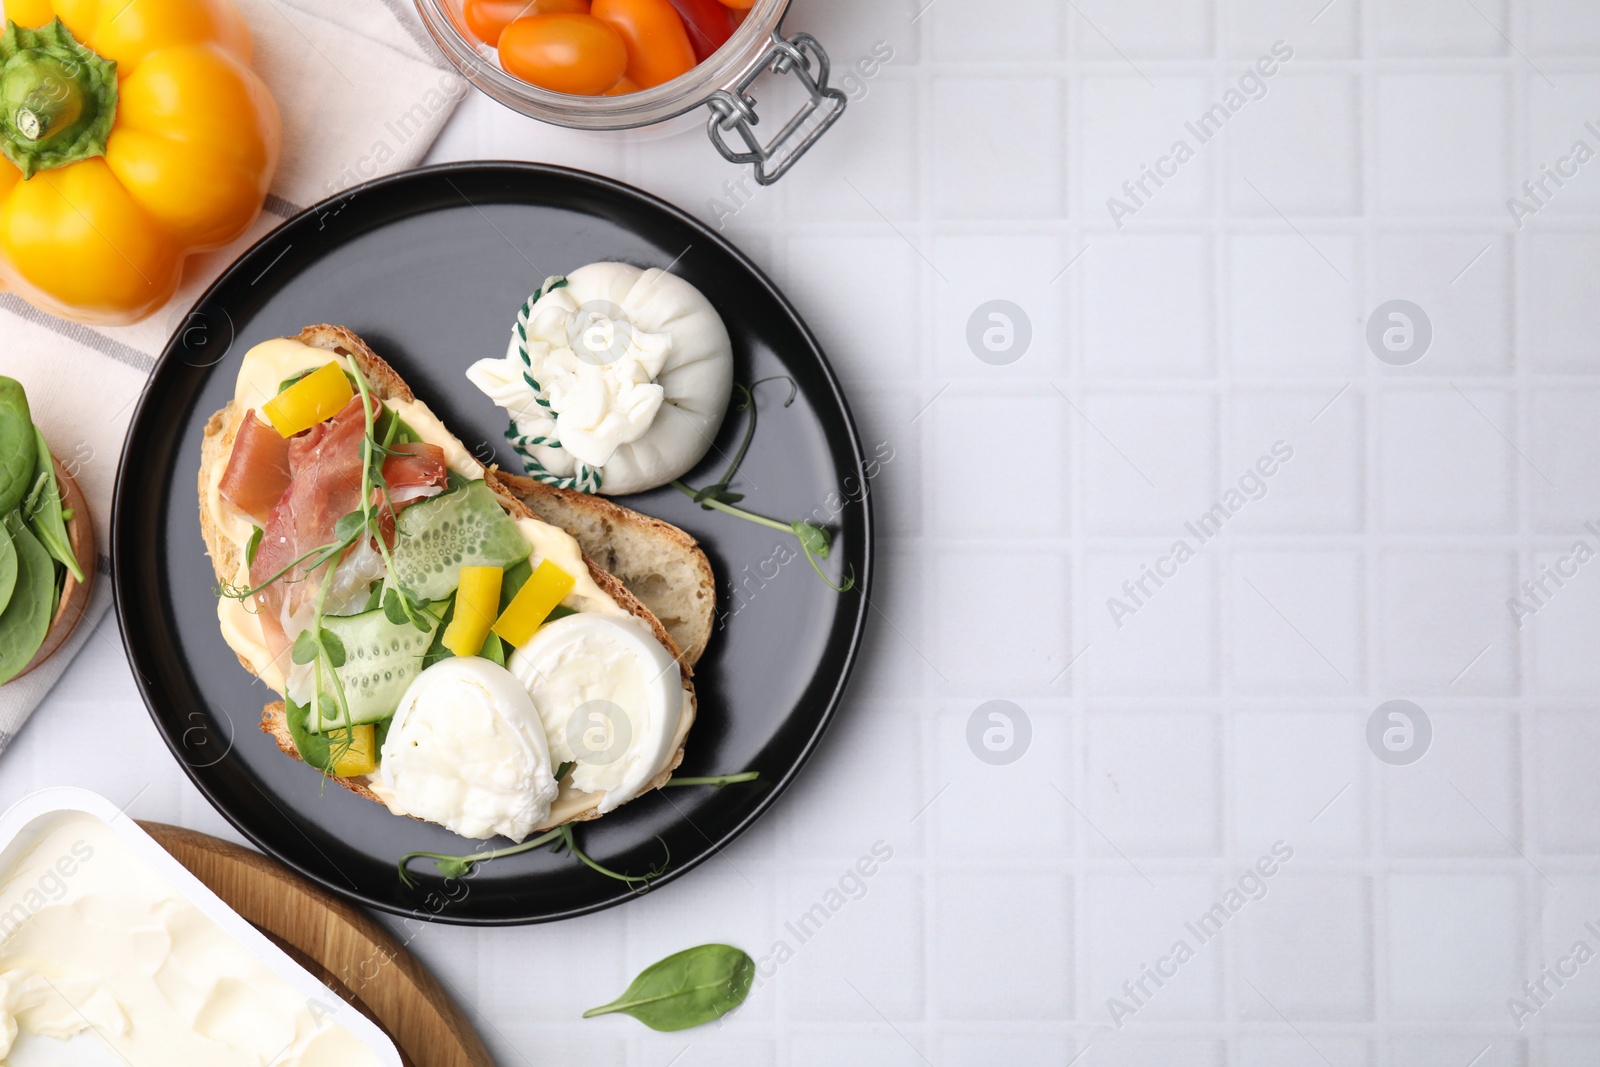 Photo of Tasty sandwich with burrata cheese, prosciutto, vegetables and ingredients on white tiled table, flat lay. Space for text